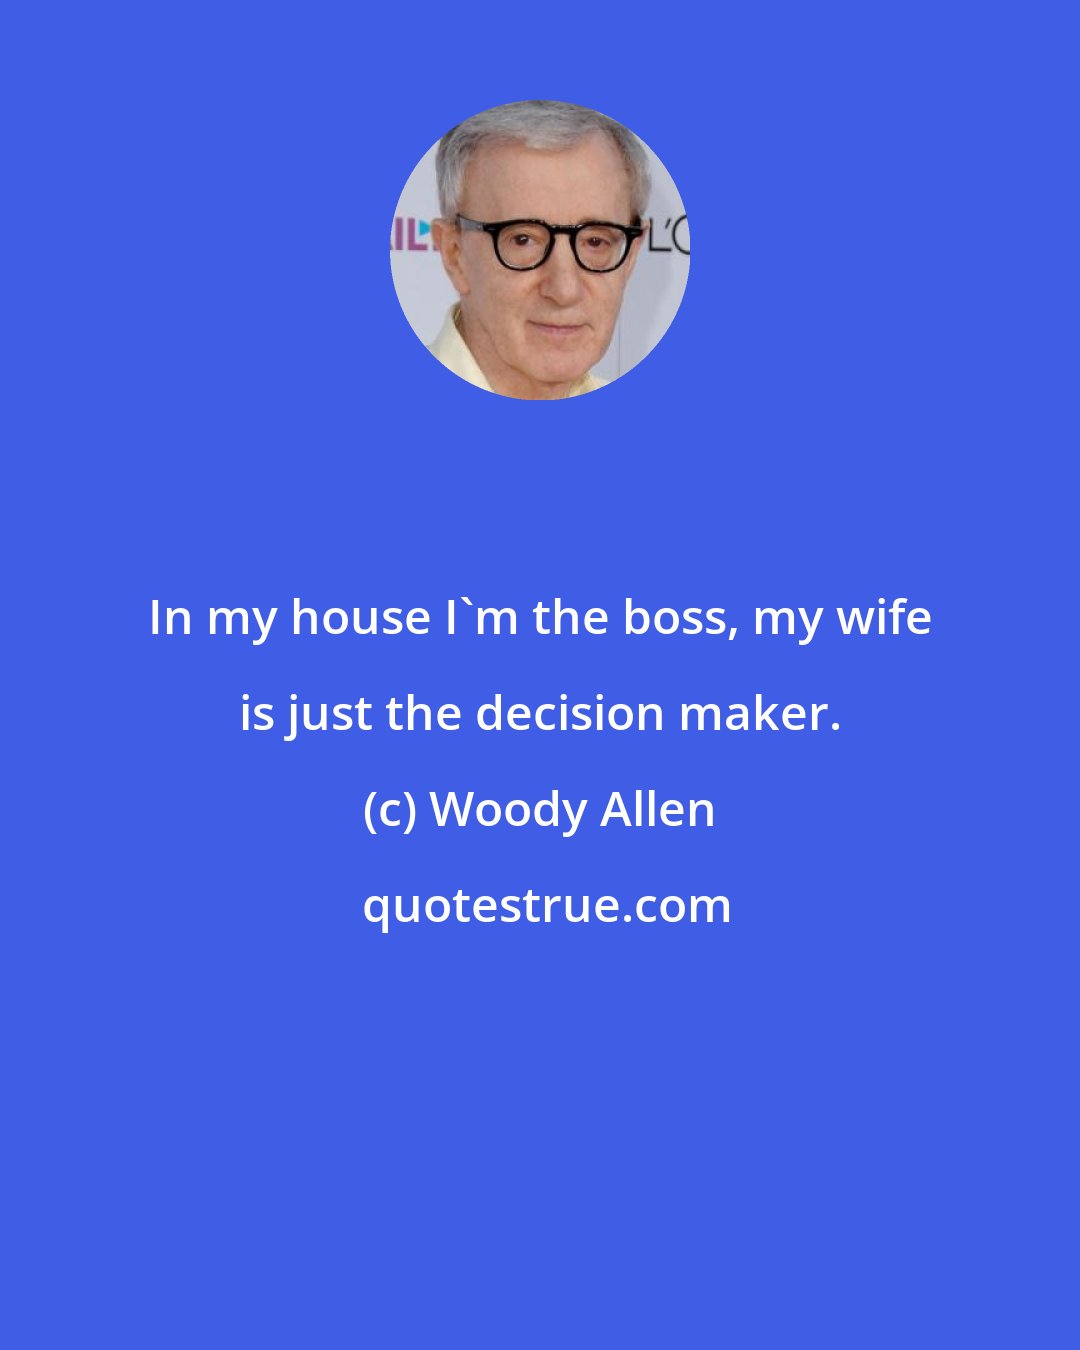 Woody Allen: In my house I'm the boss, my wife is just the decision maker.